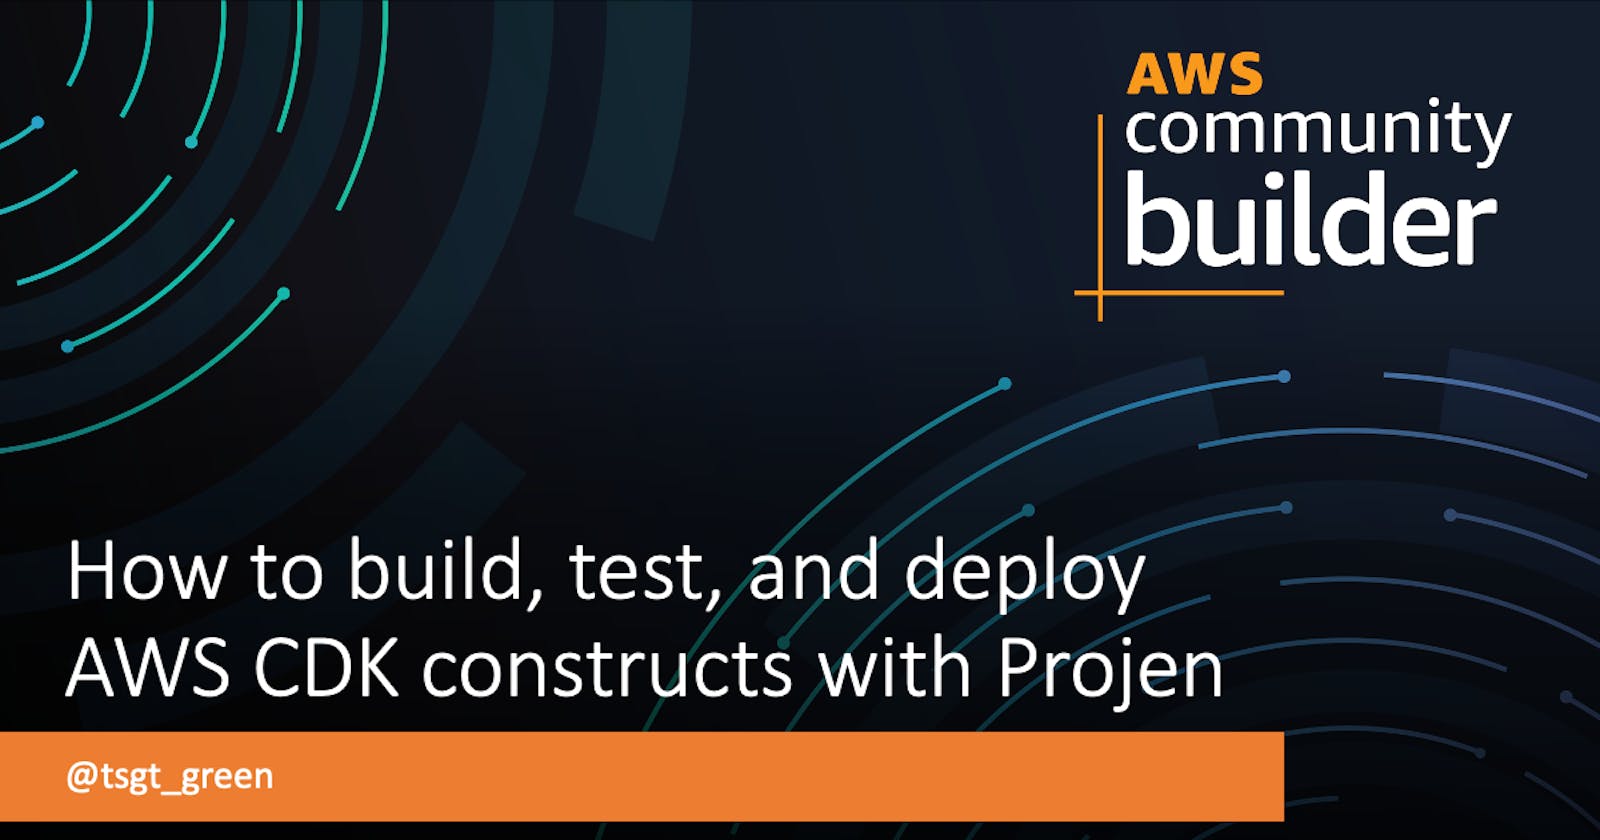 How to build, test, and deploy AWS CDK constructs with Projen